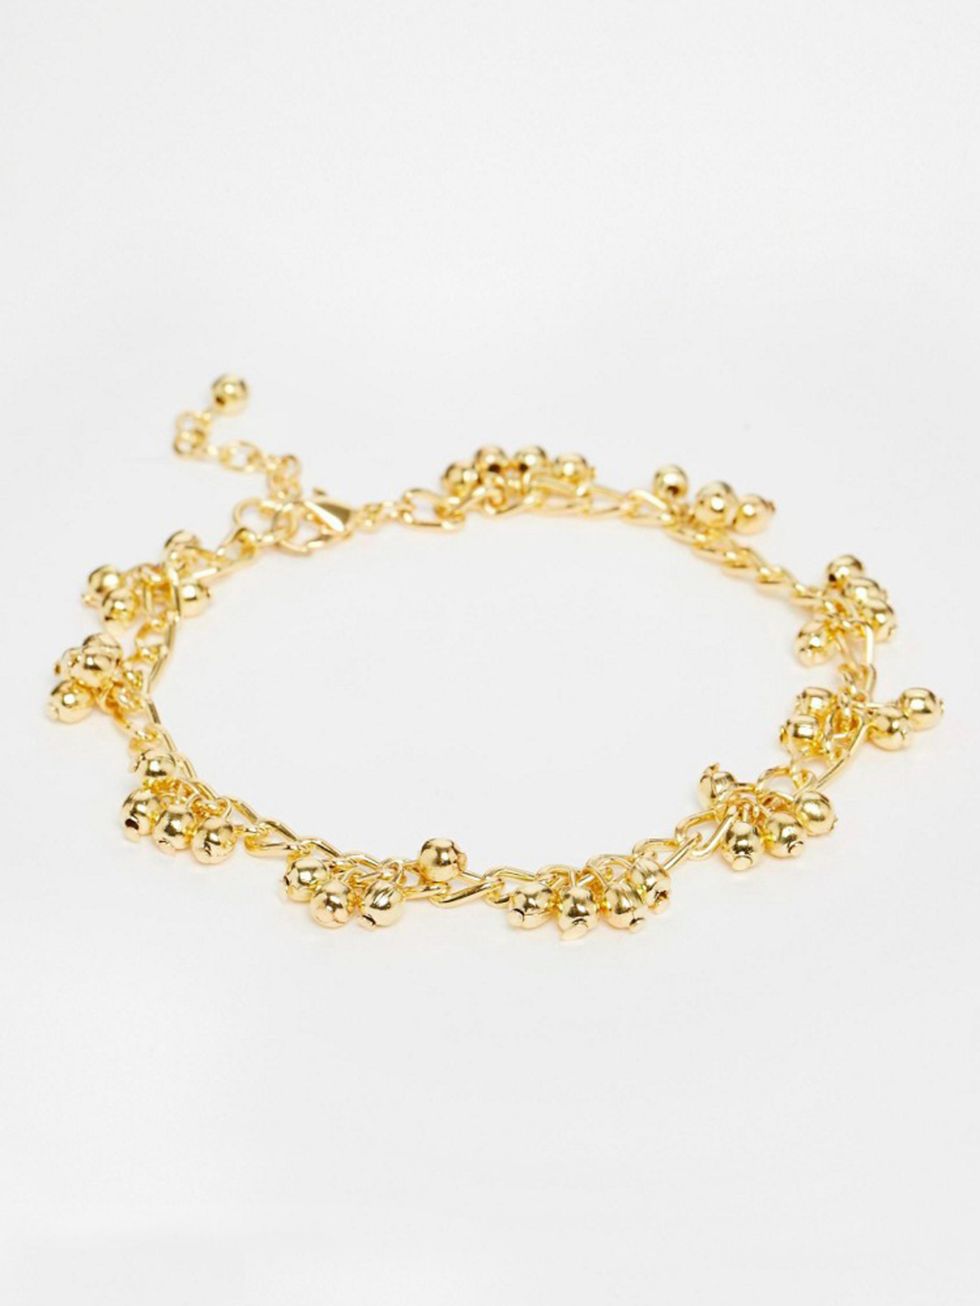 <p>£6, <a href="http://www.asos.com/asos/asos-cluster-anklet/prod/pgeproduct.aspx?iid=6271073&clr=Gold&SearchQuery=anklet&pgesize=36&pge=0&totalstyles=56&gridsize=3&gridrow=10&gridcolumn=3" target="_blank">ASOS</a></p>